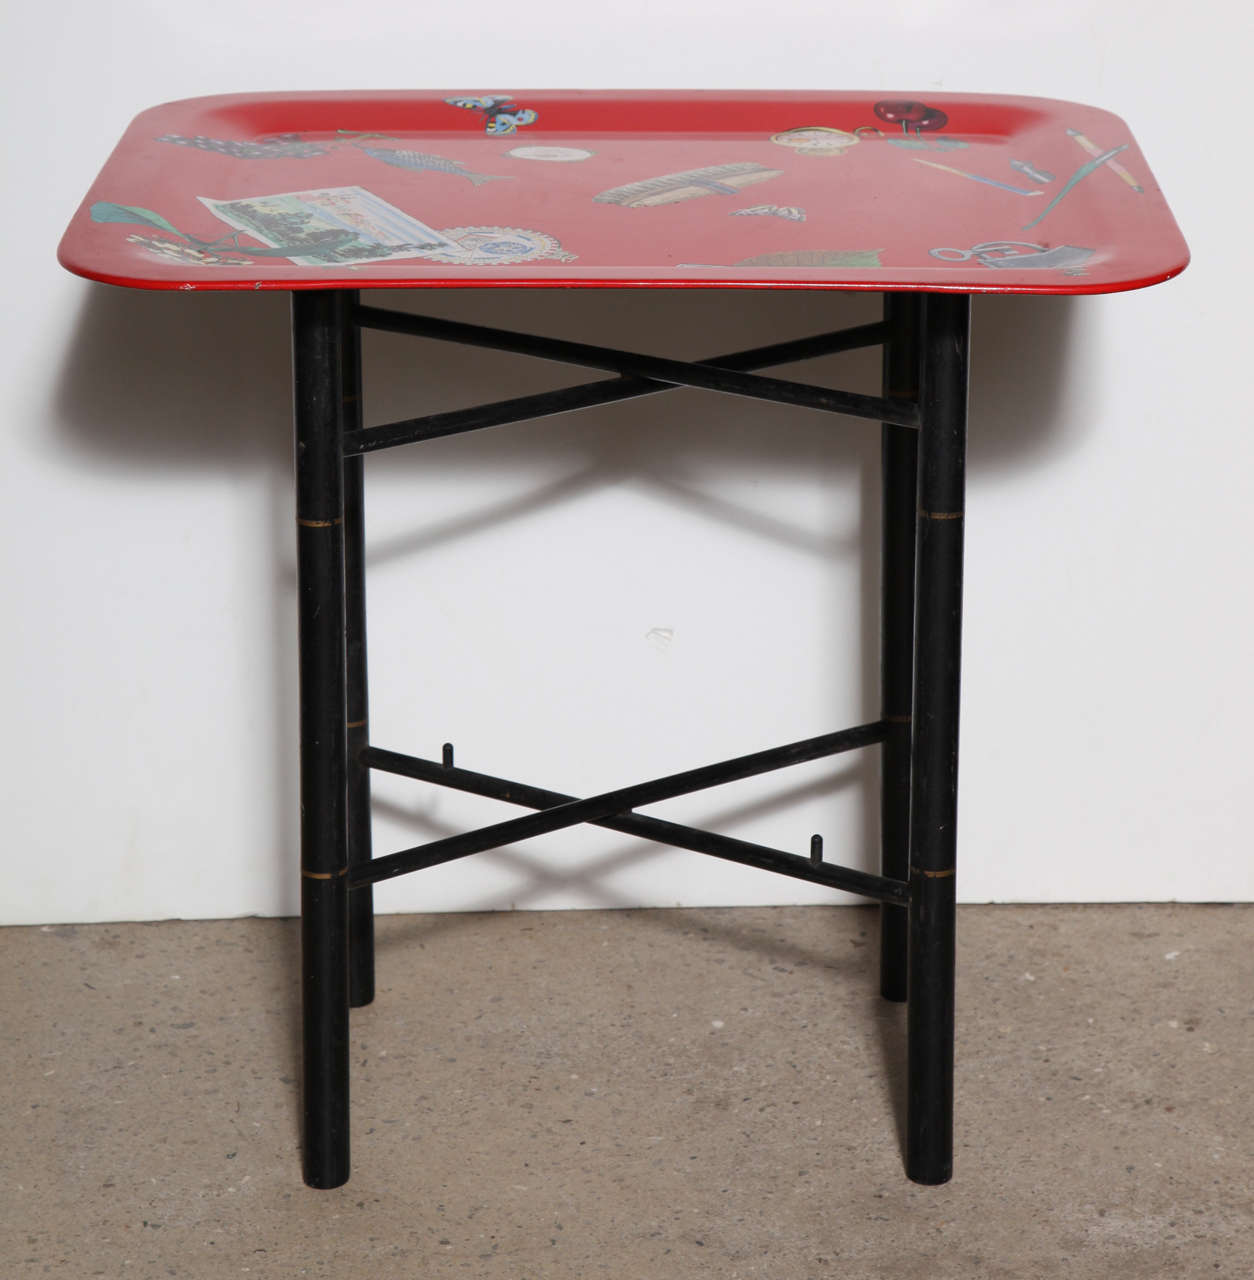 Piero Fornasetti Trompe L'Oeil Occasional Table, Butlers Tray Table. Featuring a Red enameled lipped rectangular Aluminum tray with colorful lithographic transfer prints and folding Black lacquered wood stand with gold details. Red background